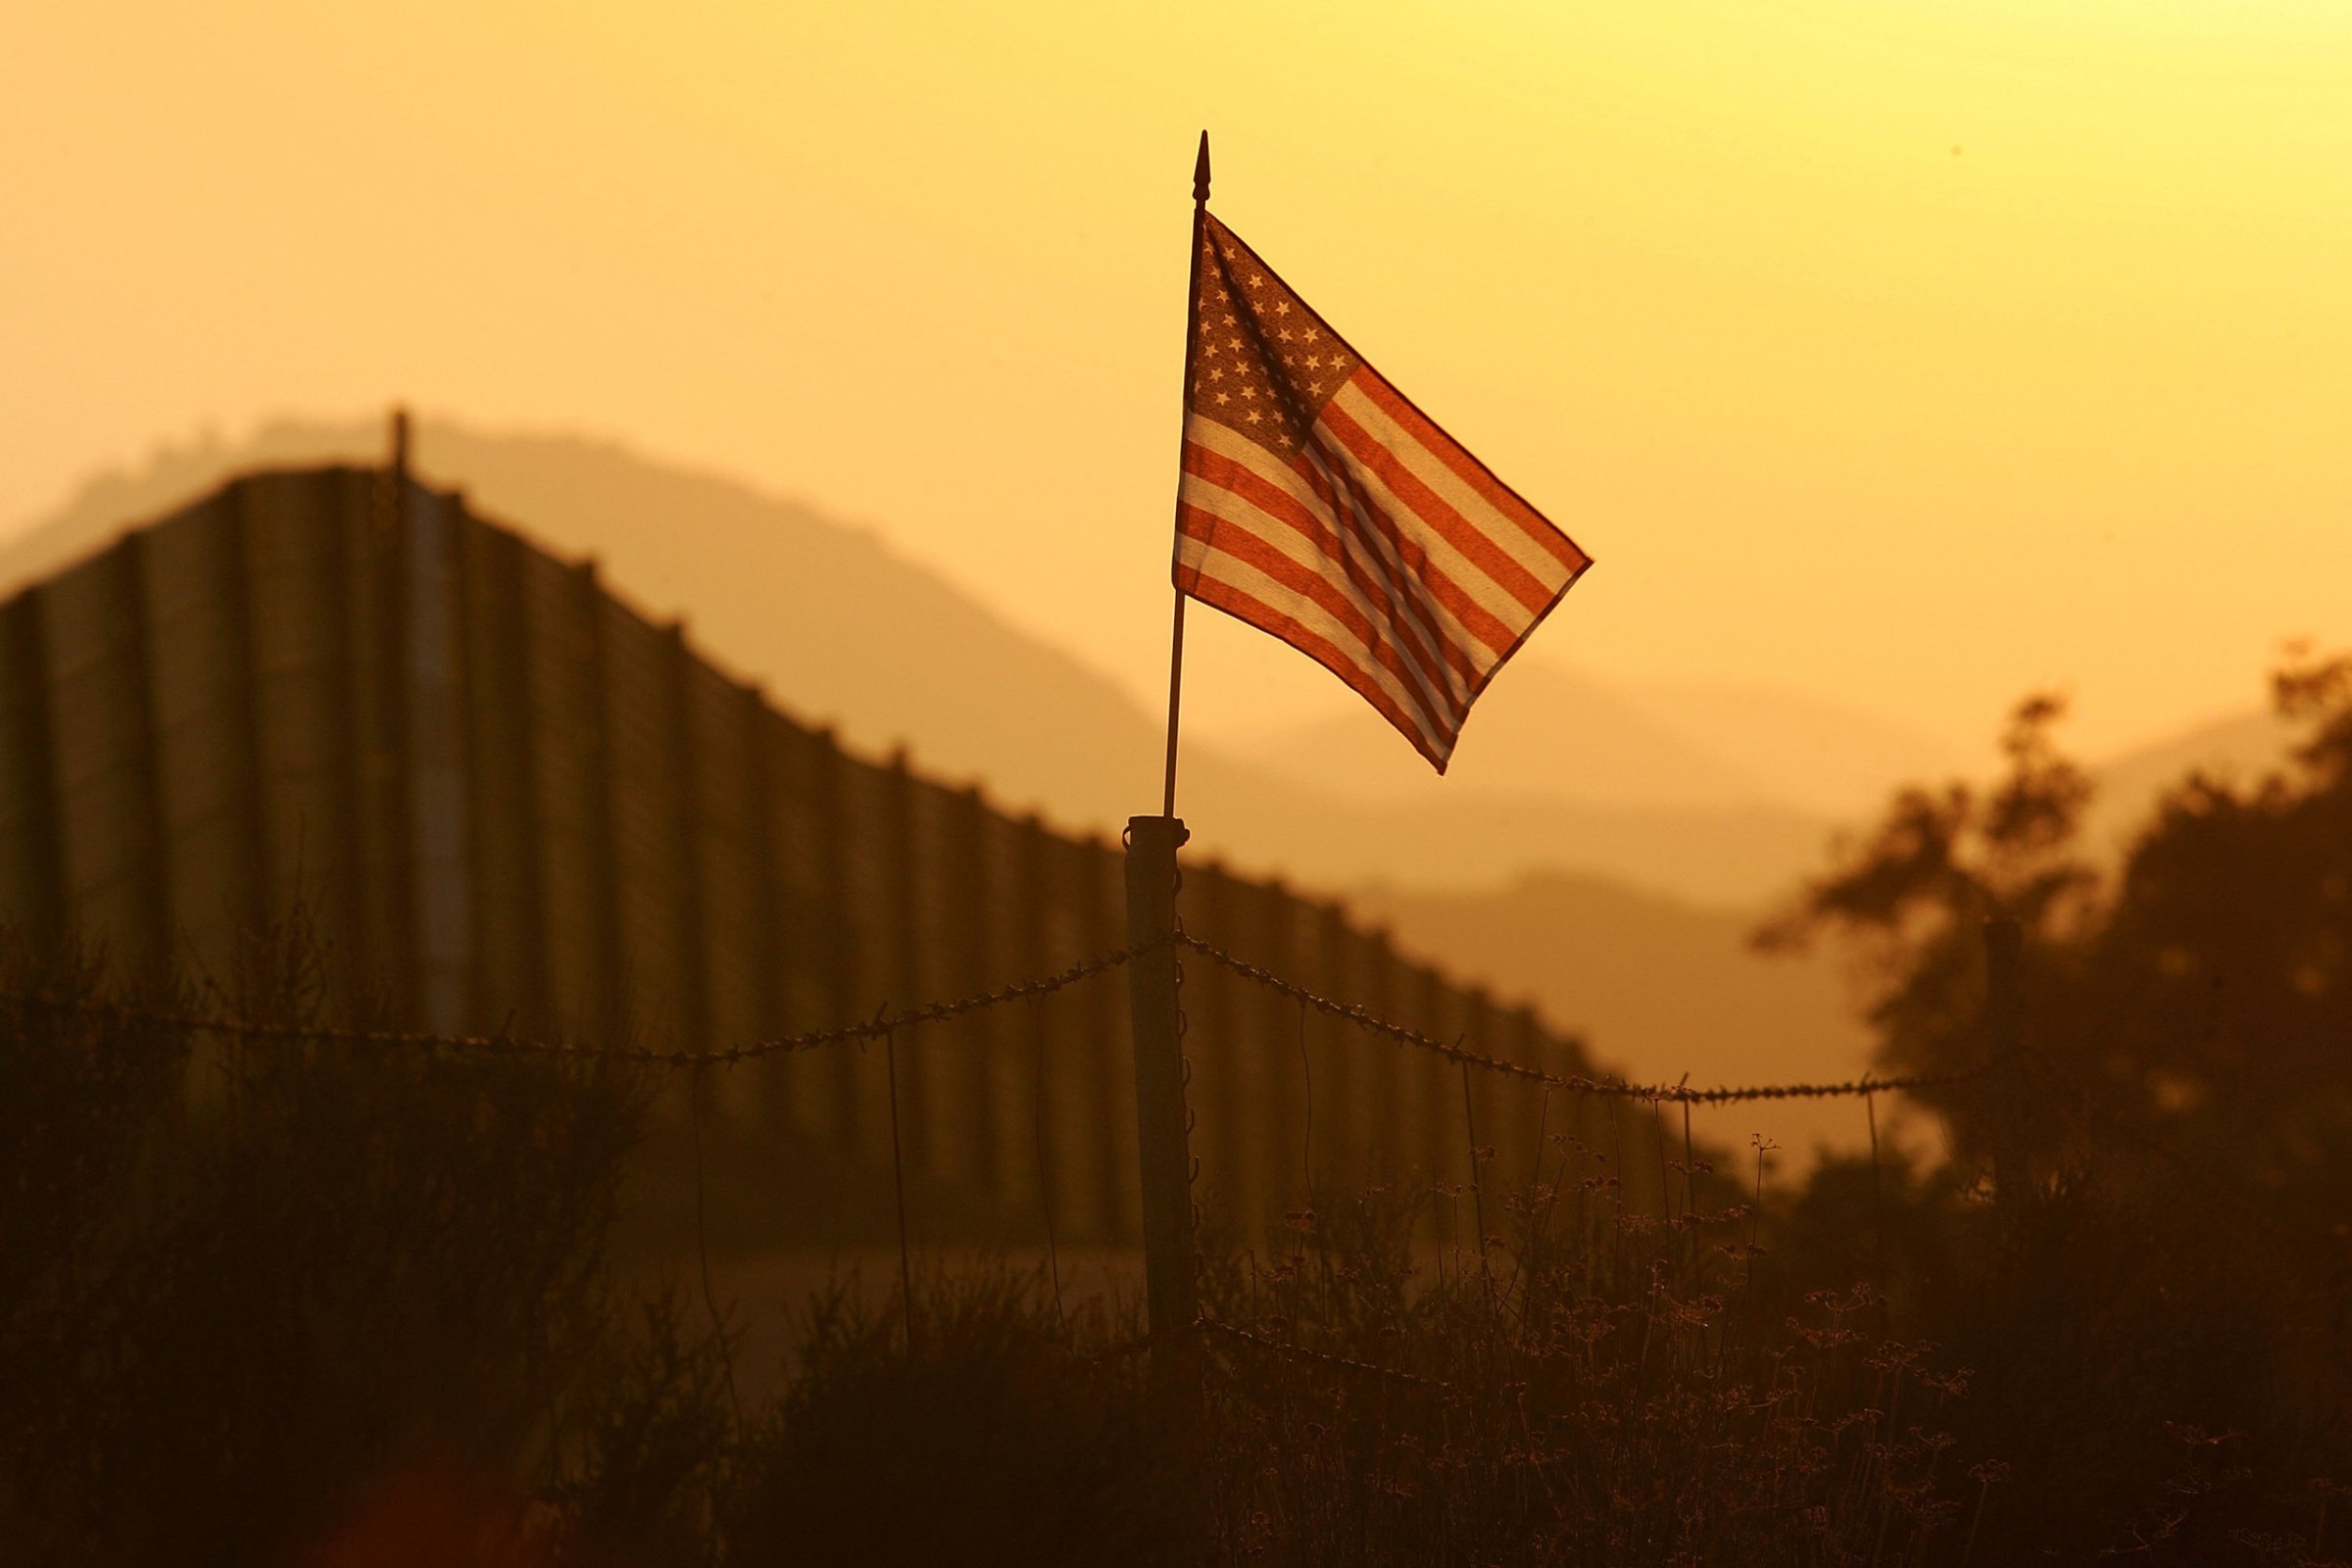 A U.S. flag put up by activists who oppose illegal immigration flies near the US-Mexico border fence near Campo, California, on Oct. 8, 2006.